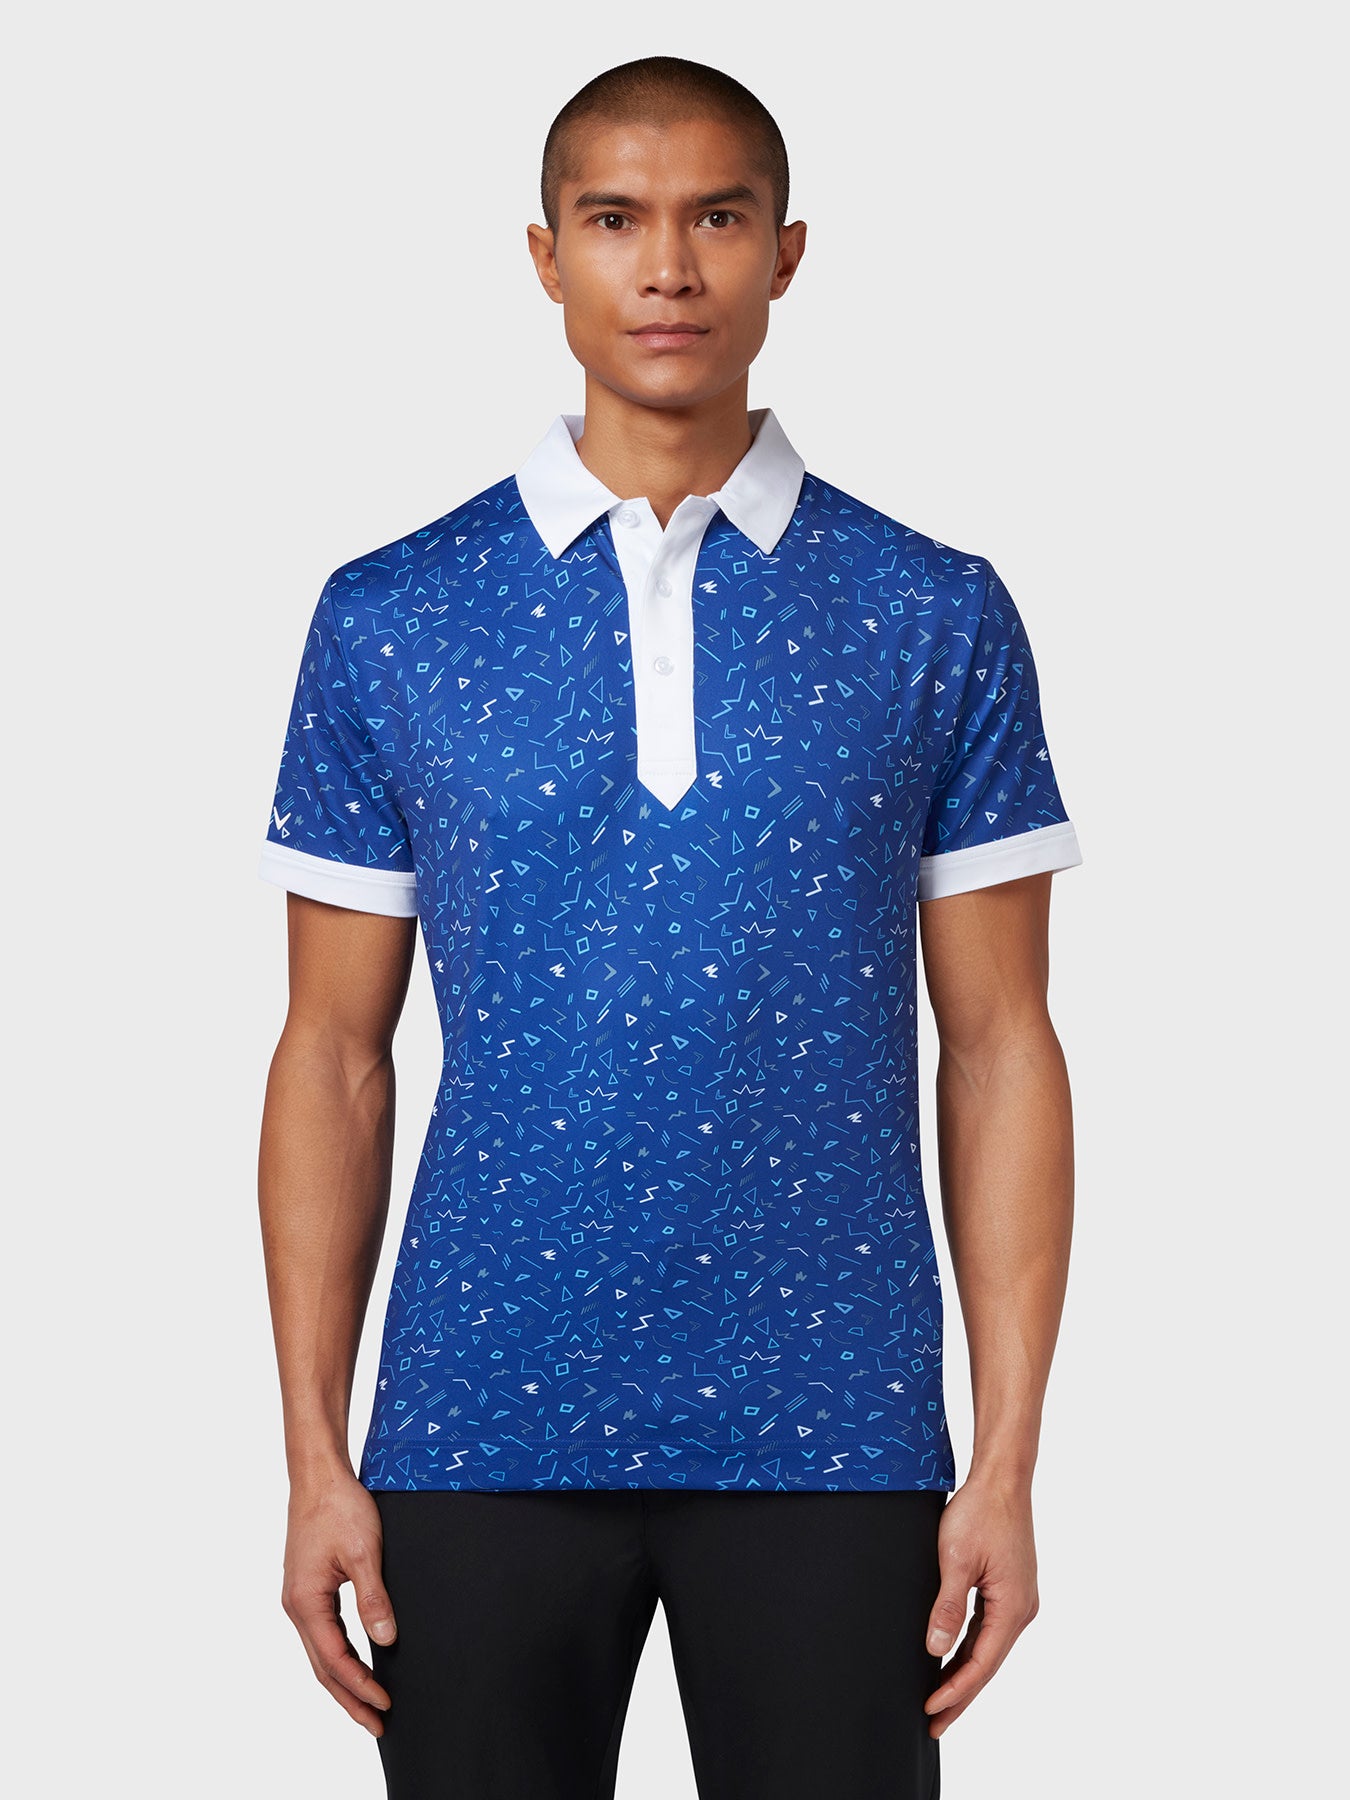 View X Series Chev Memphis All Over Print Polo In Clematis Blue Clematis Blue XXL information